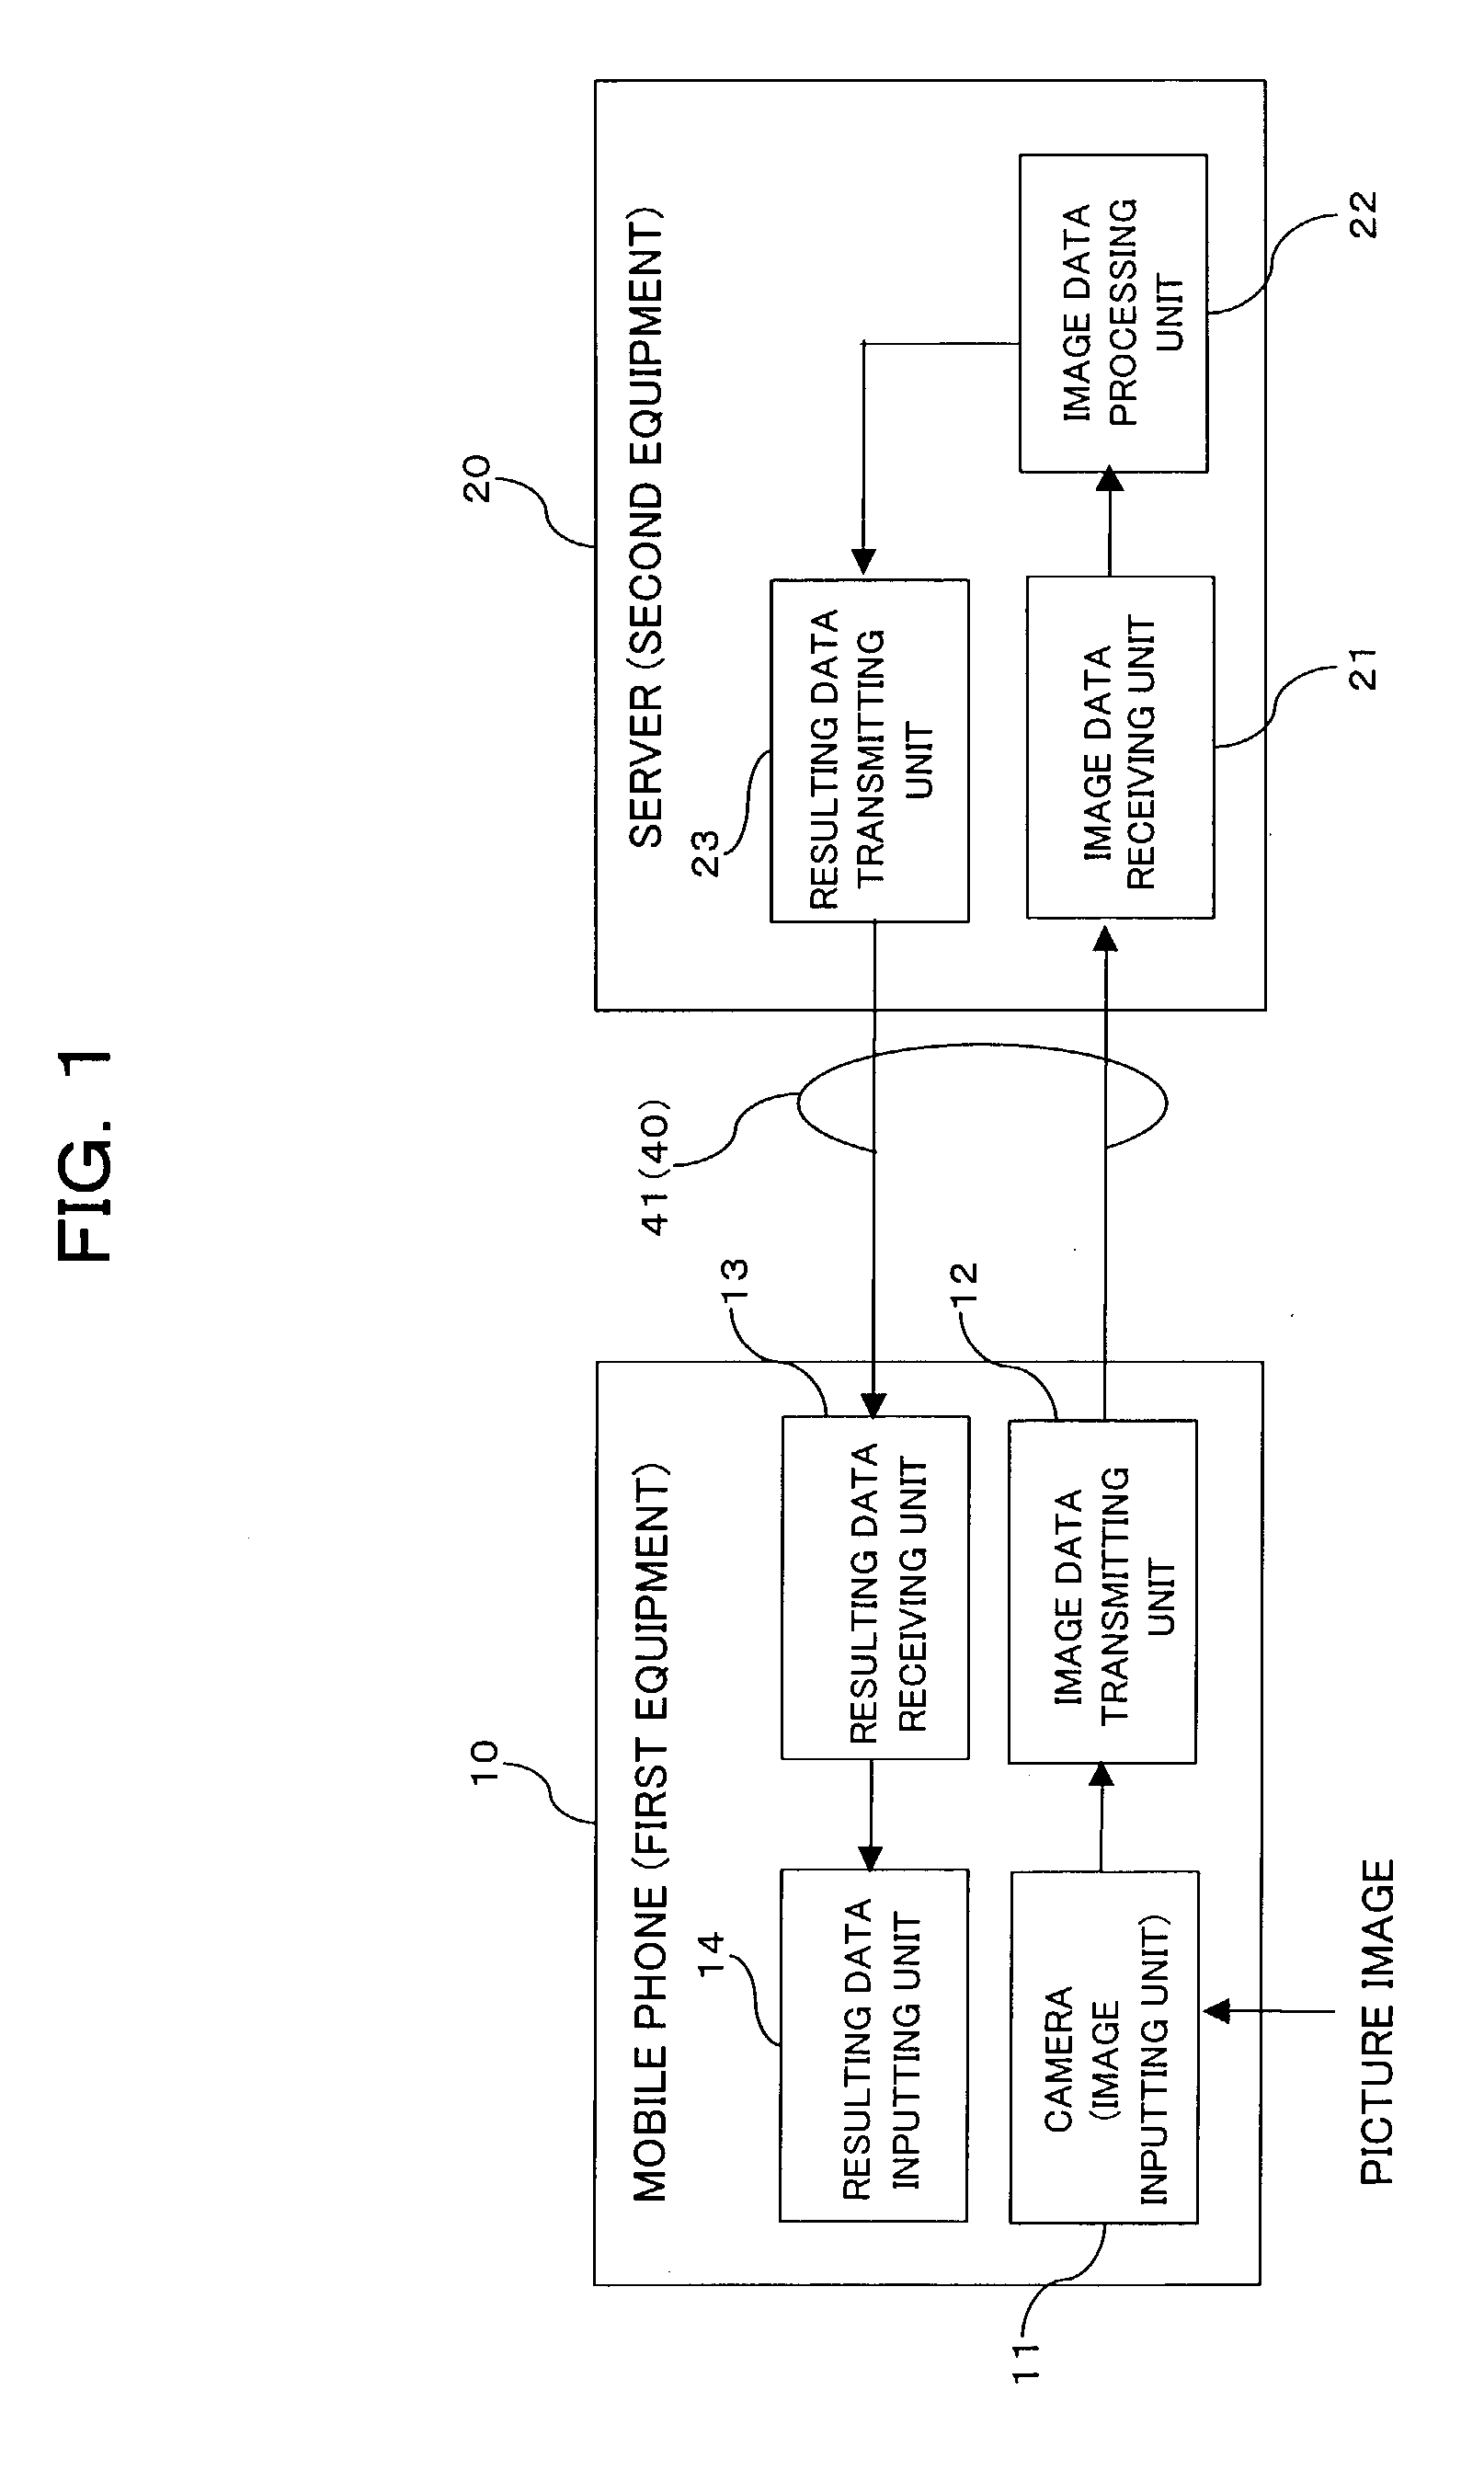 Image data processing system and image data processing server